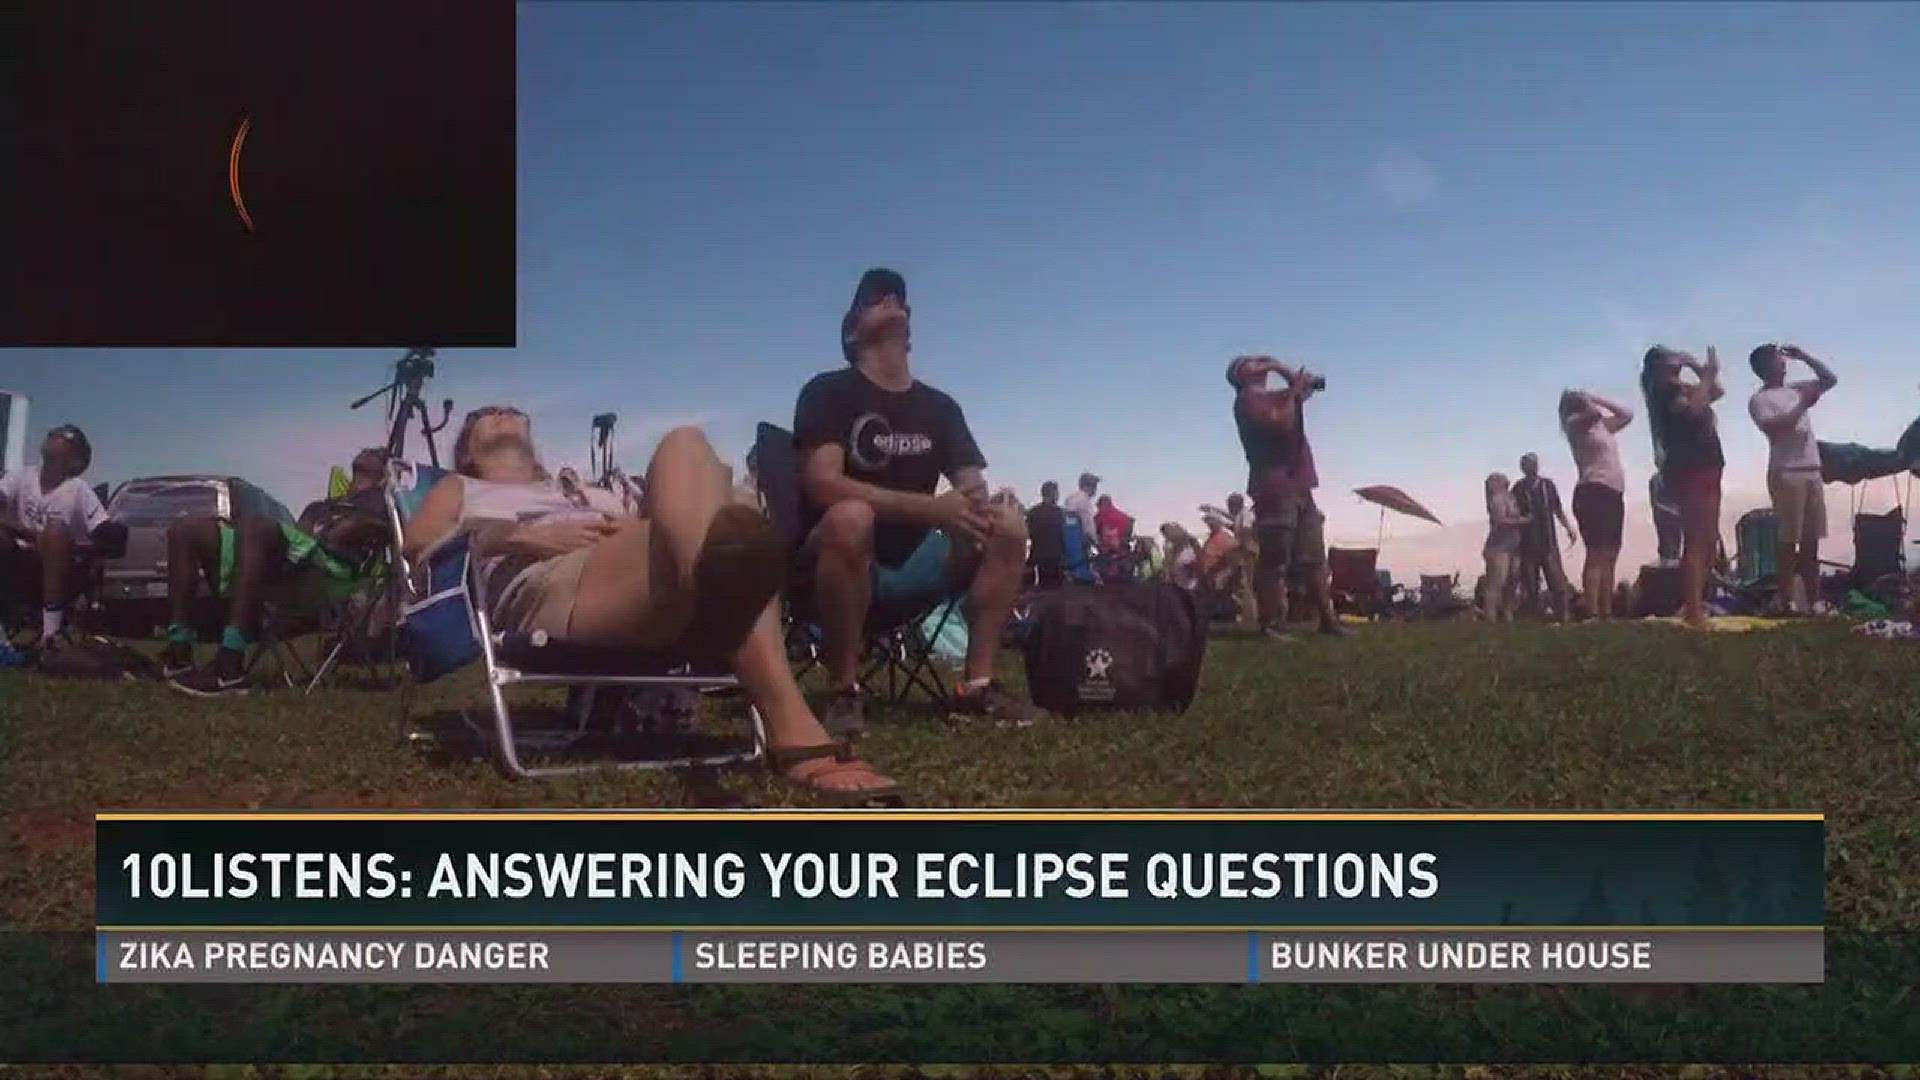 Aug. 22, 2017: Millions of people across the U.S. turned their eyes and cameras to the sky for the solar eclipse.